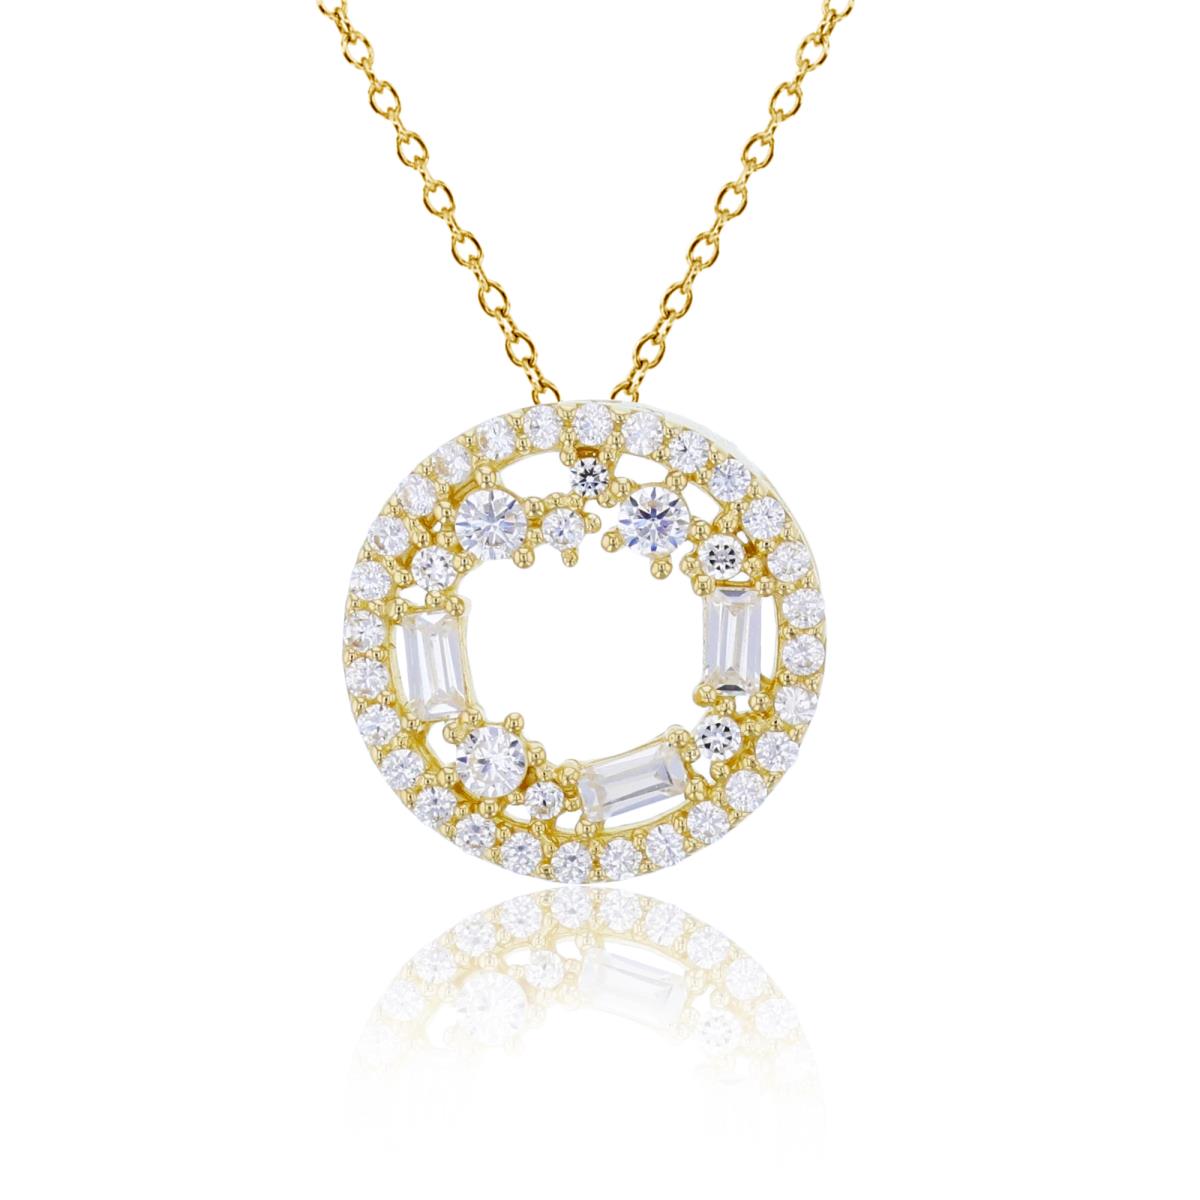 10K Yellow Gold Micropave Rd Cut & Baguette CZ Open Circle 18" Necklace